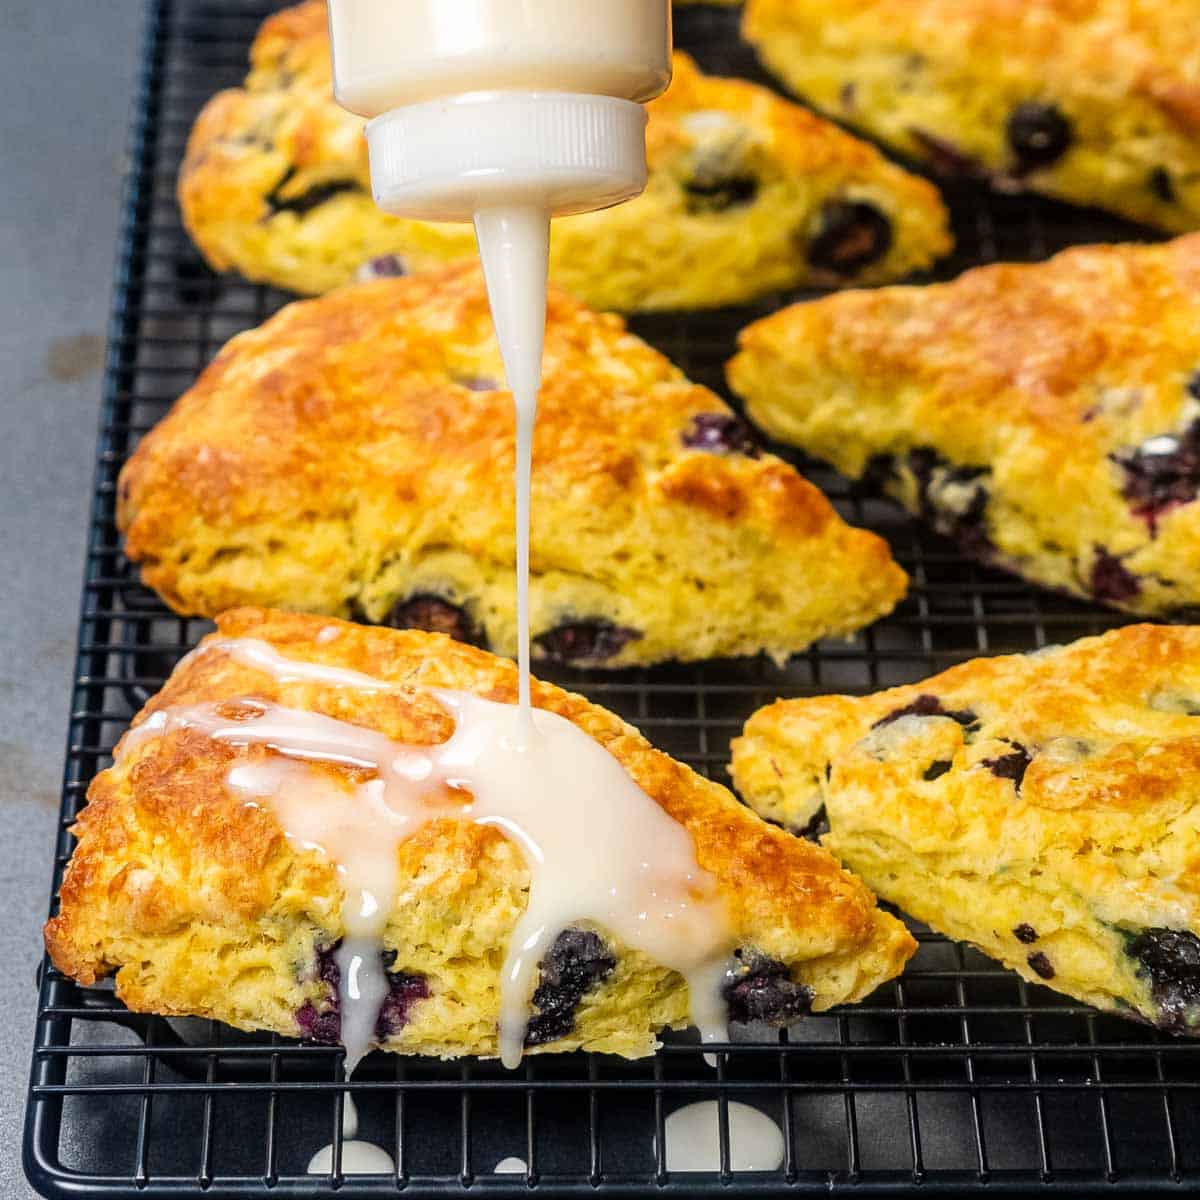 drizzling icing on lemon blueberry scones.